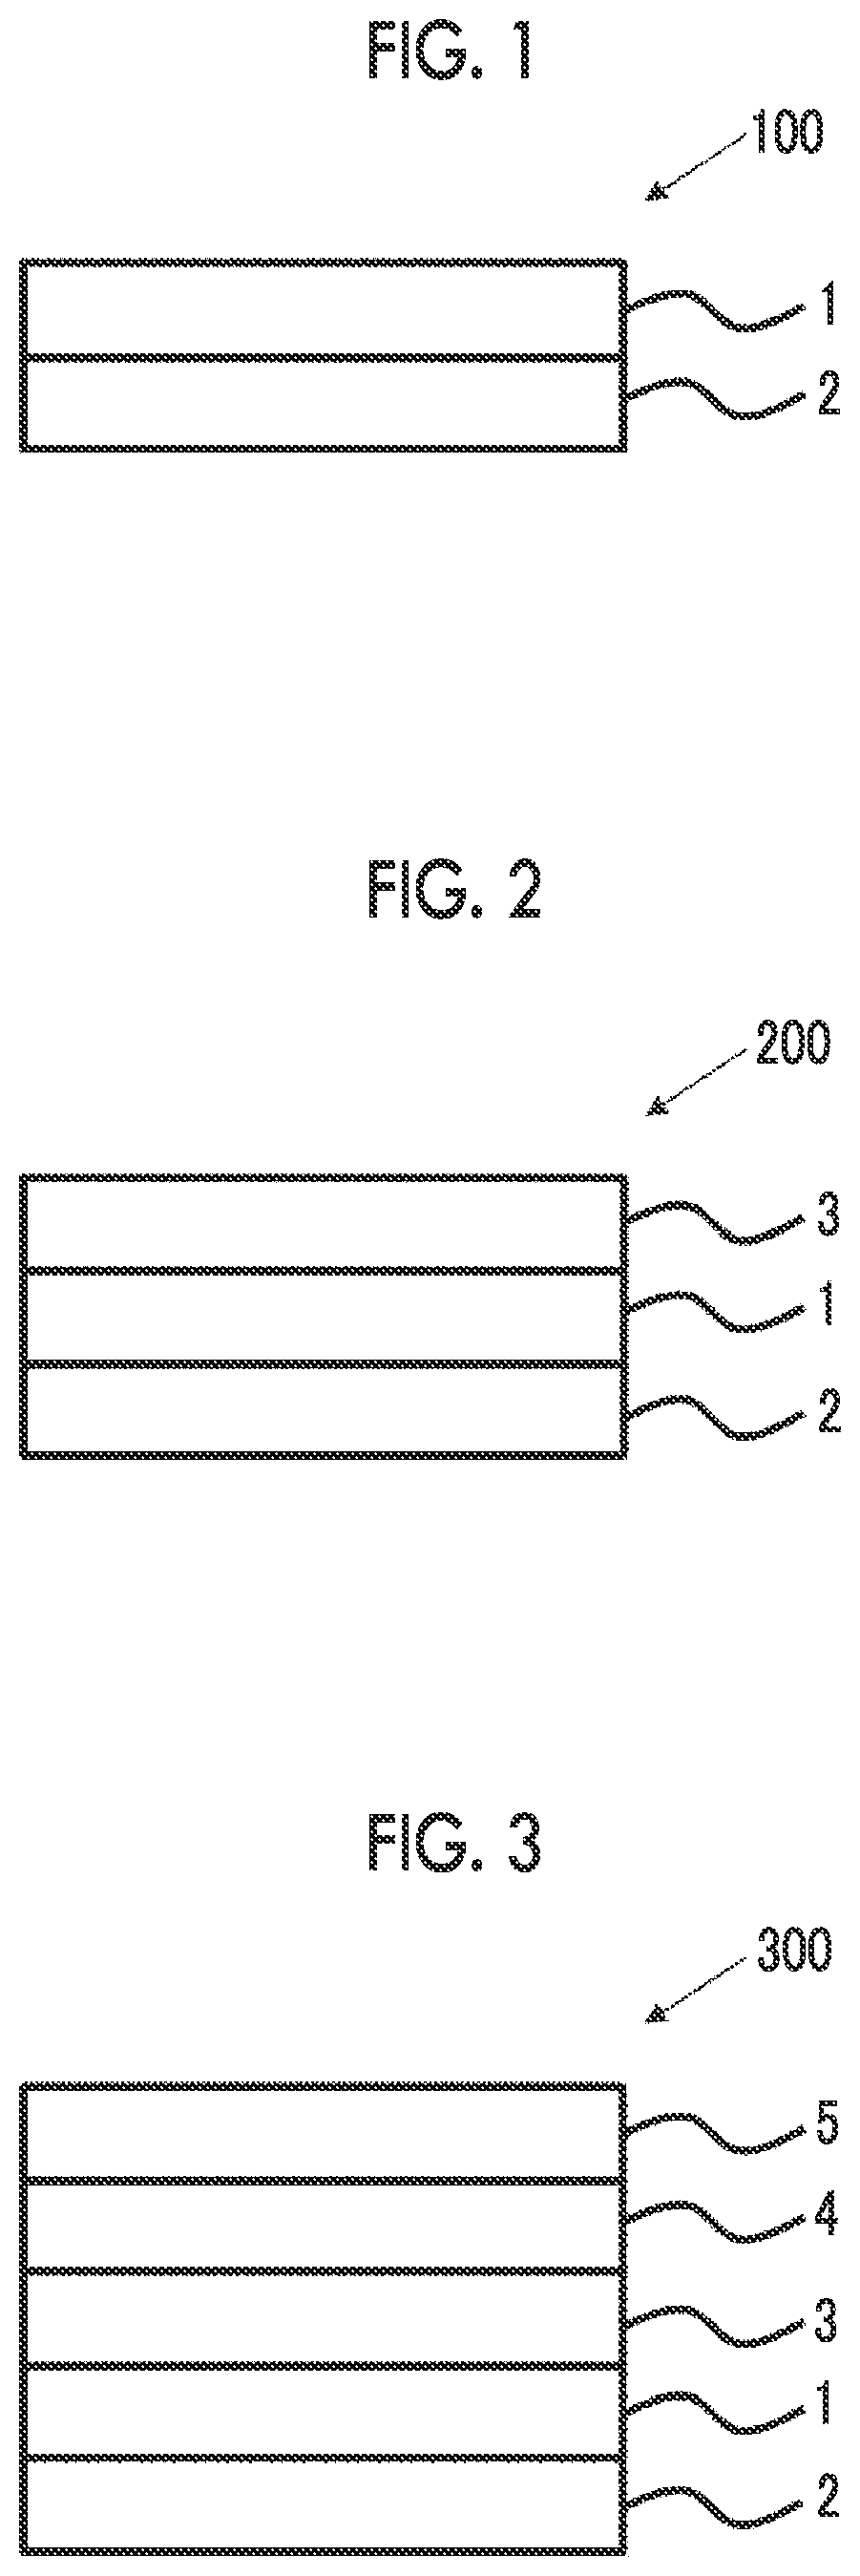 Laminate, liquid crystal display device, and organic electroluminescent display device